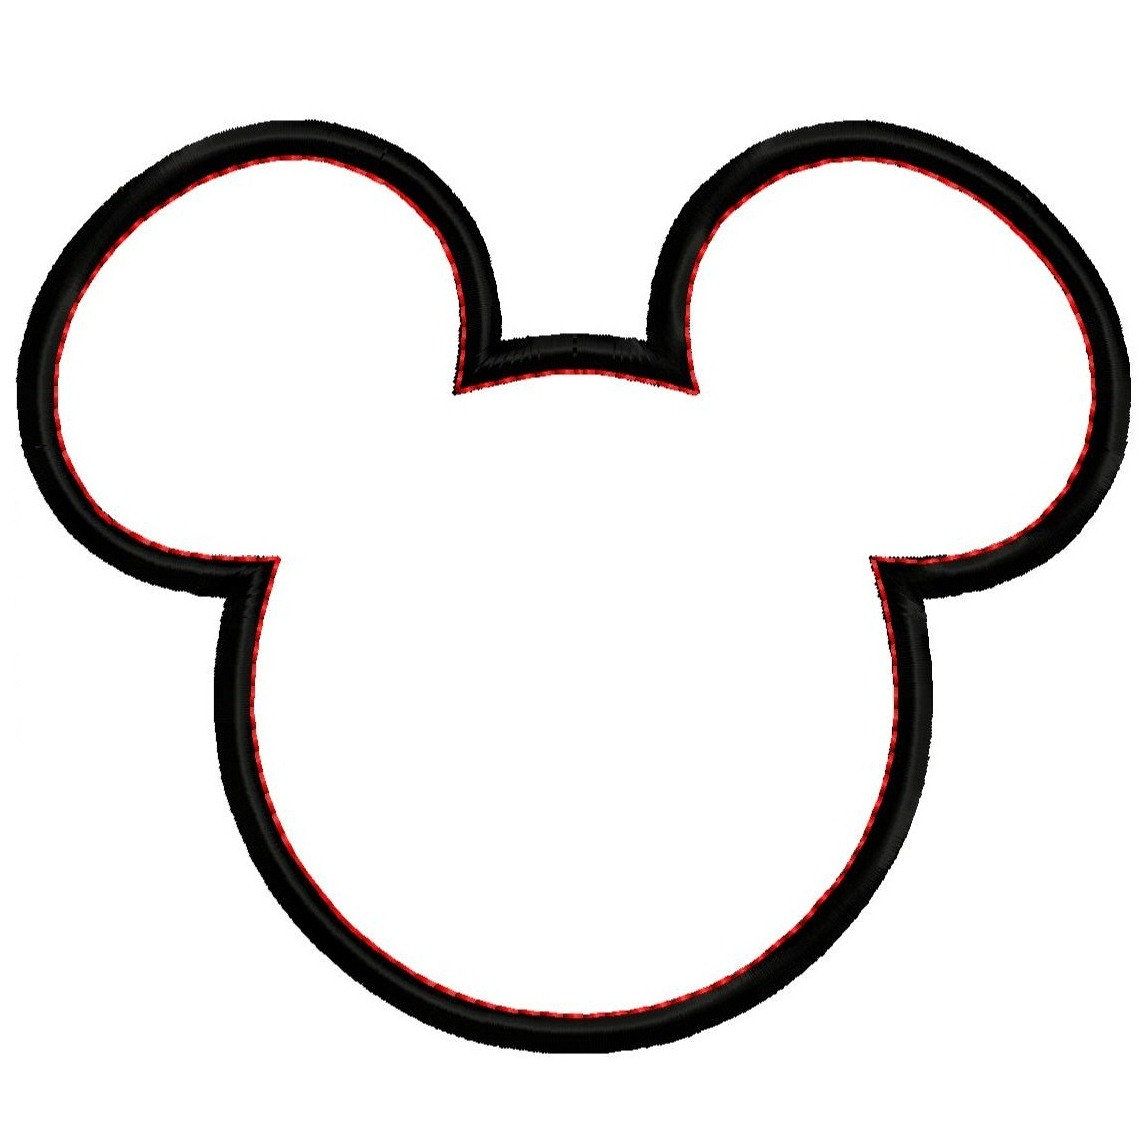 Free Picture Of Mickey Mouse Head, Download Free Clip Art, Free Clip Art on Clipart Library